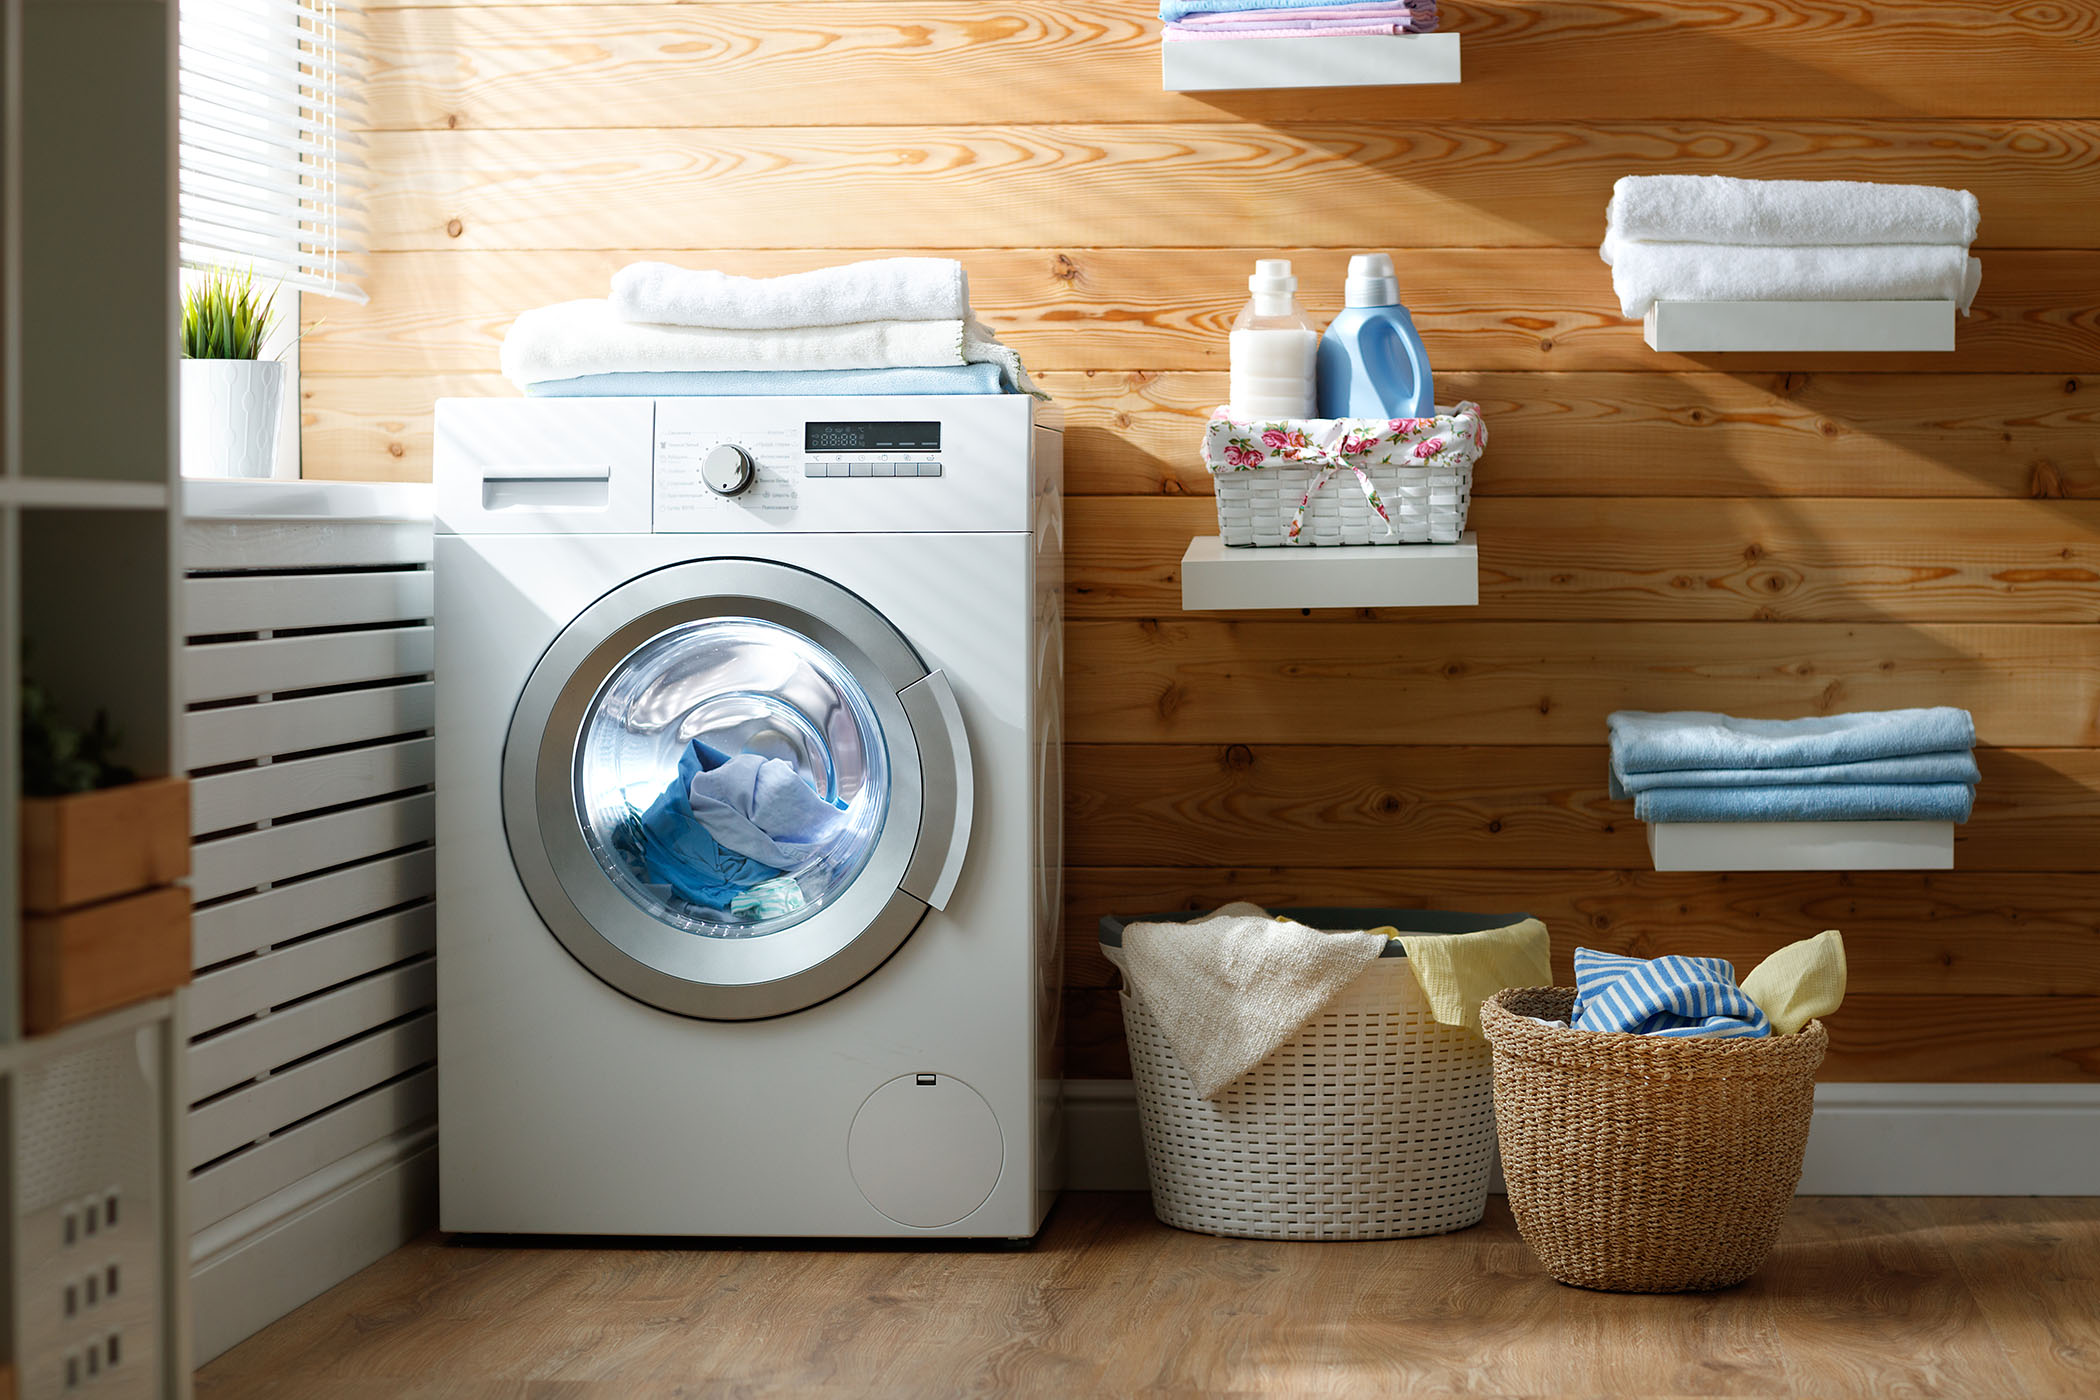 Clothes washers image